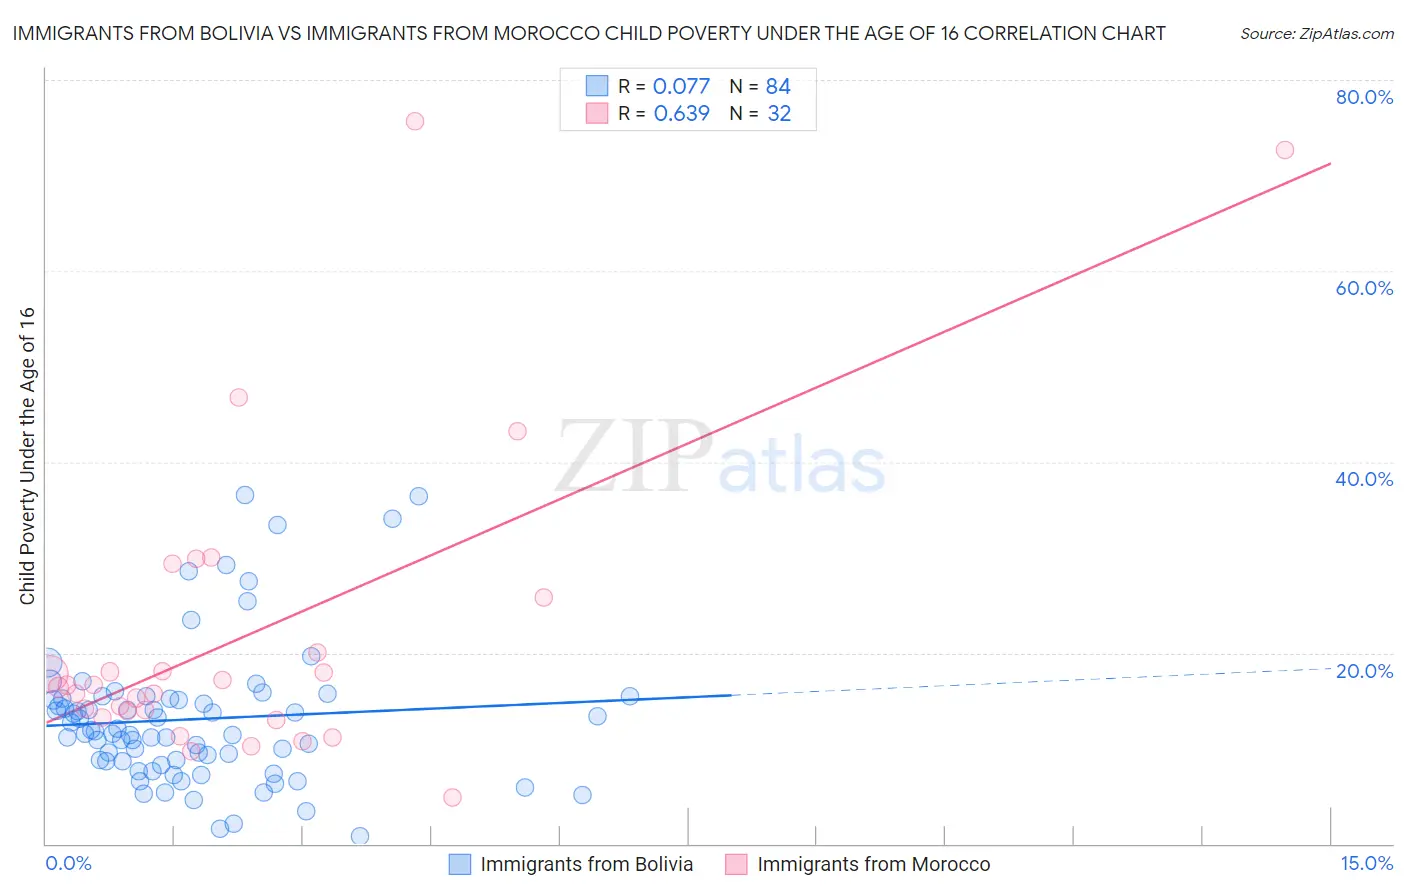 Immigrants from Bolivia vs Immigrants from Morocco Child Poverty Under the Age of 16